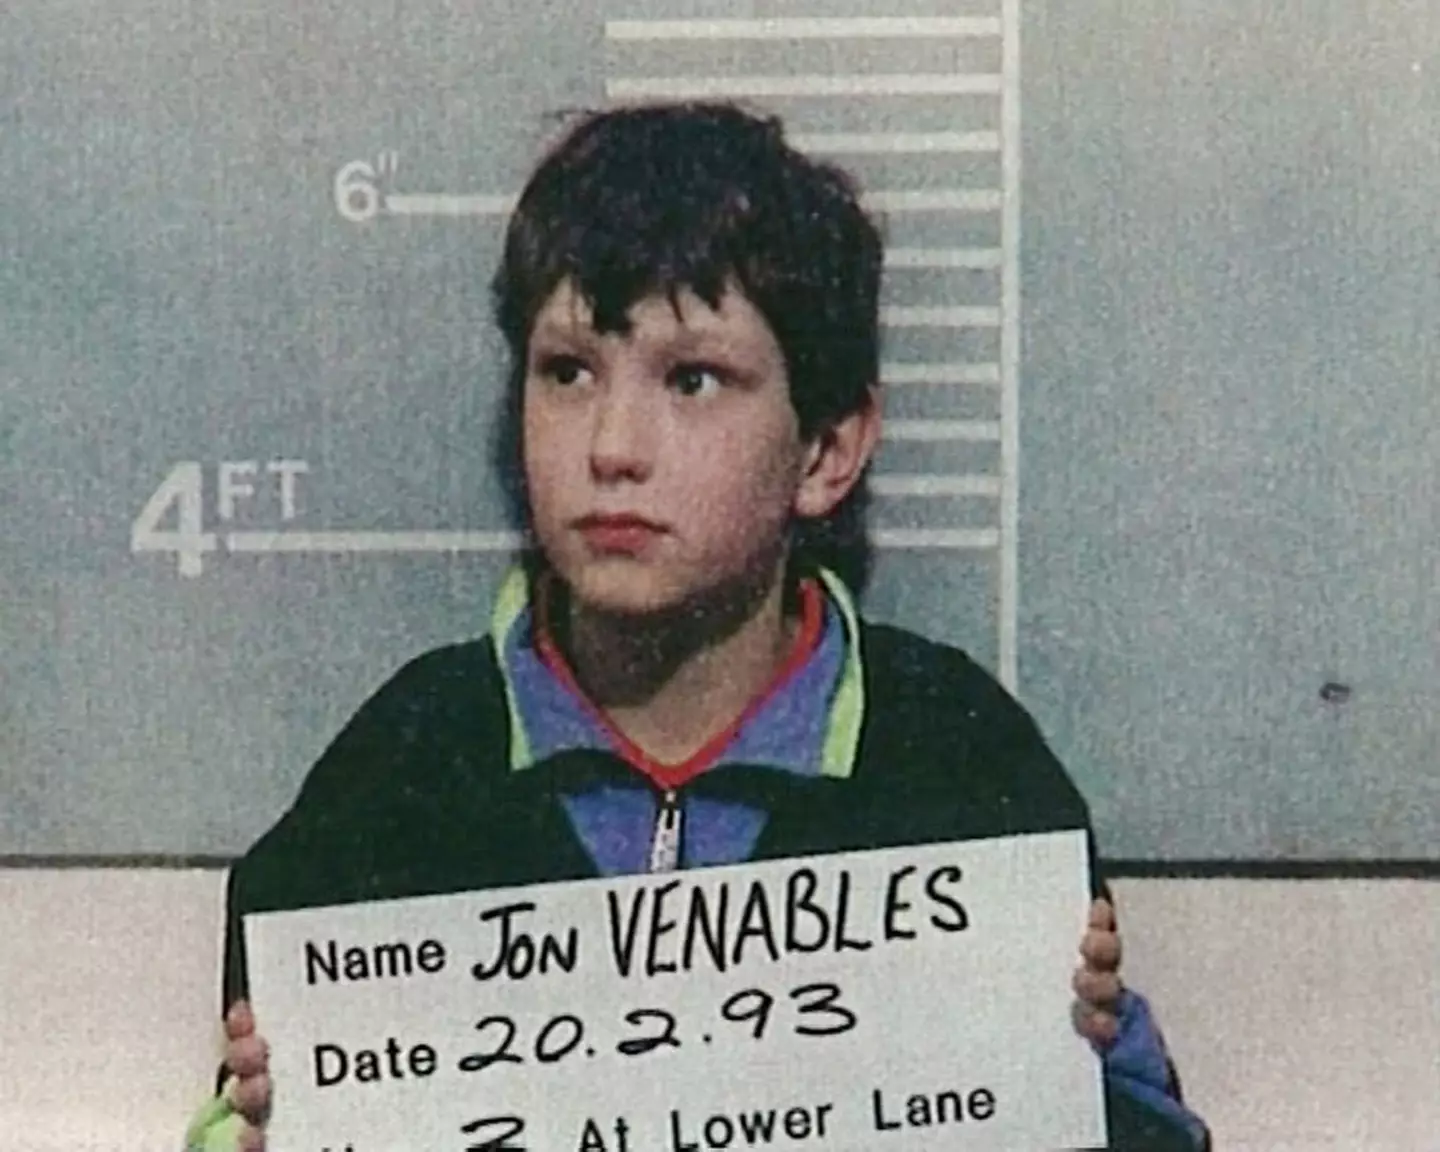 Venables was 10 when he murdered Bulger.